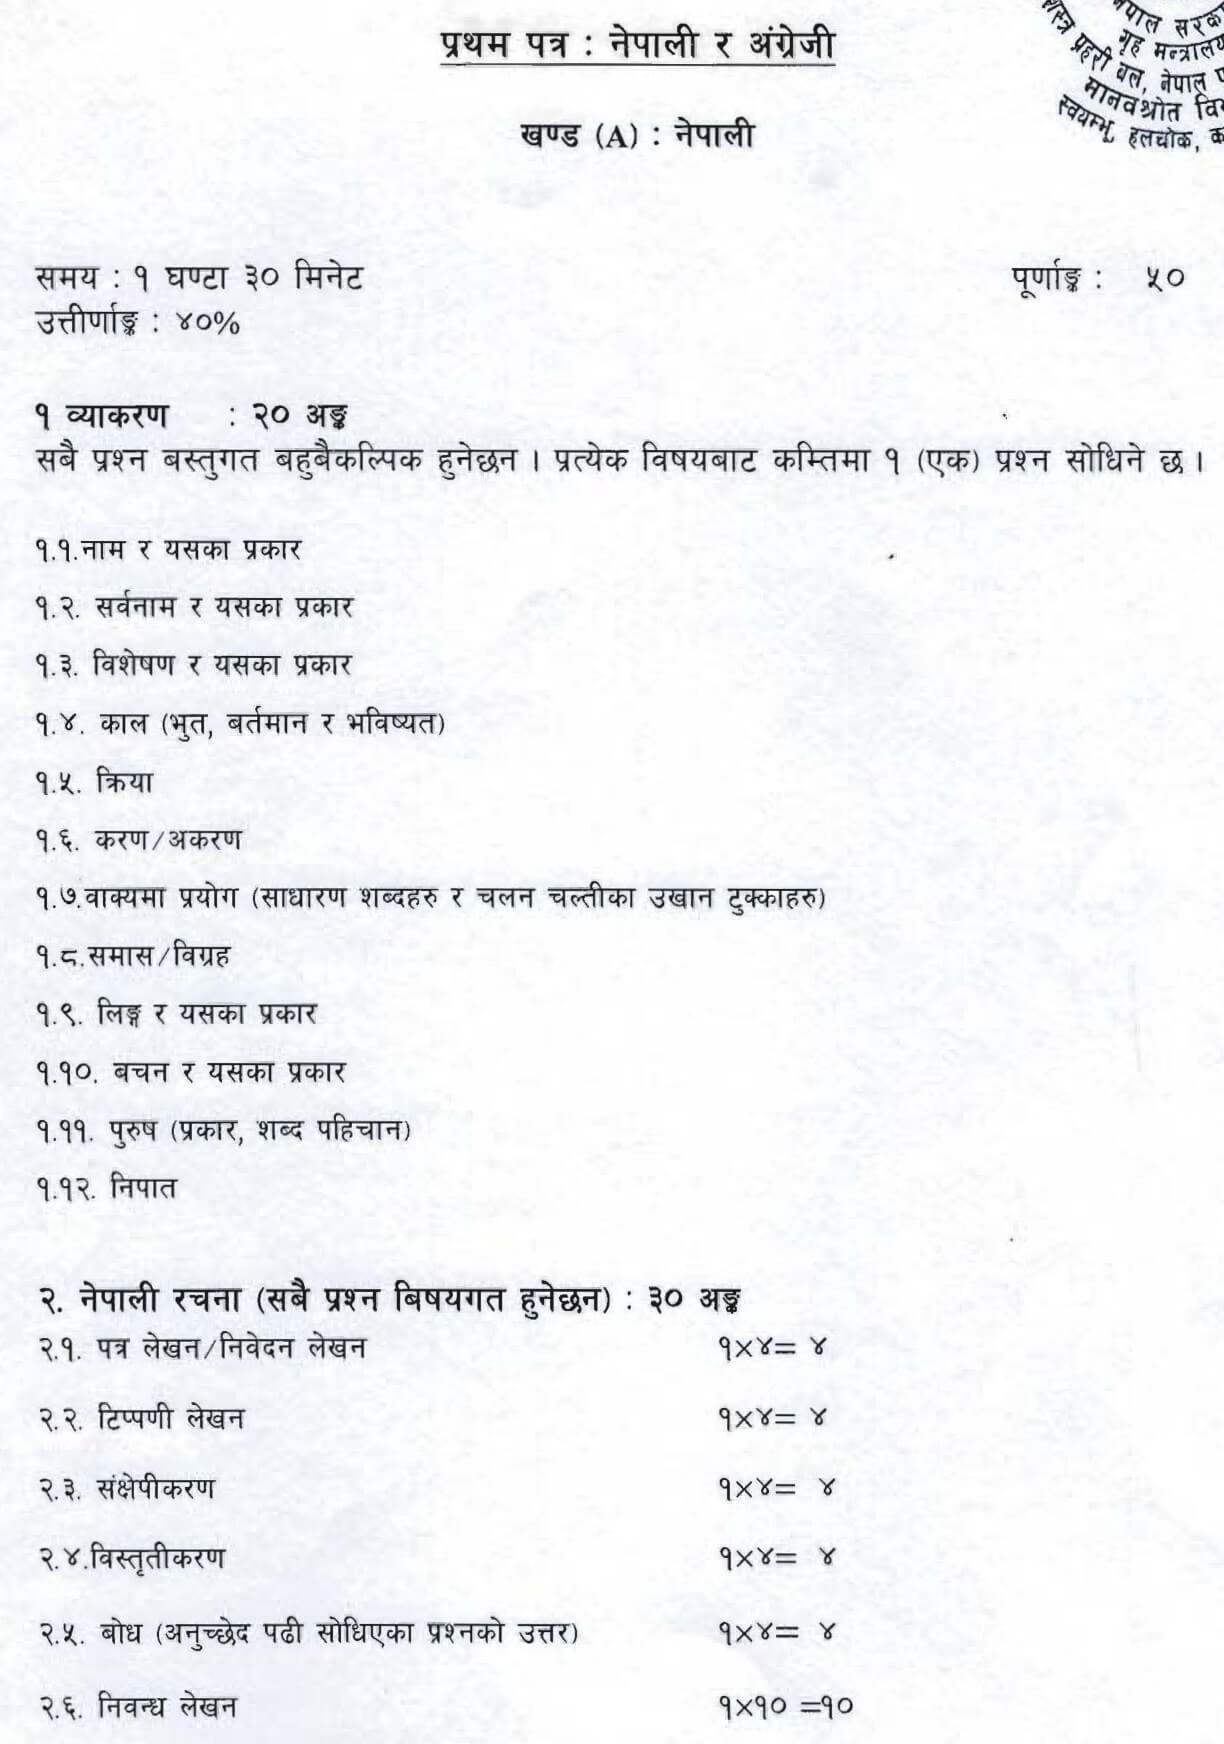 APF Inspector Syllabus PDF. Armed Police Force Inspector Syllabus. Sasastra Prahari Inspector Syllabus. APF Nepal Syllabus PDF. APF GOV NP Syllabus